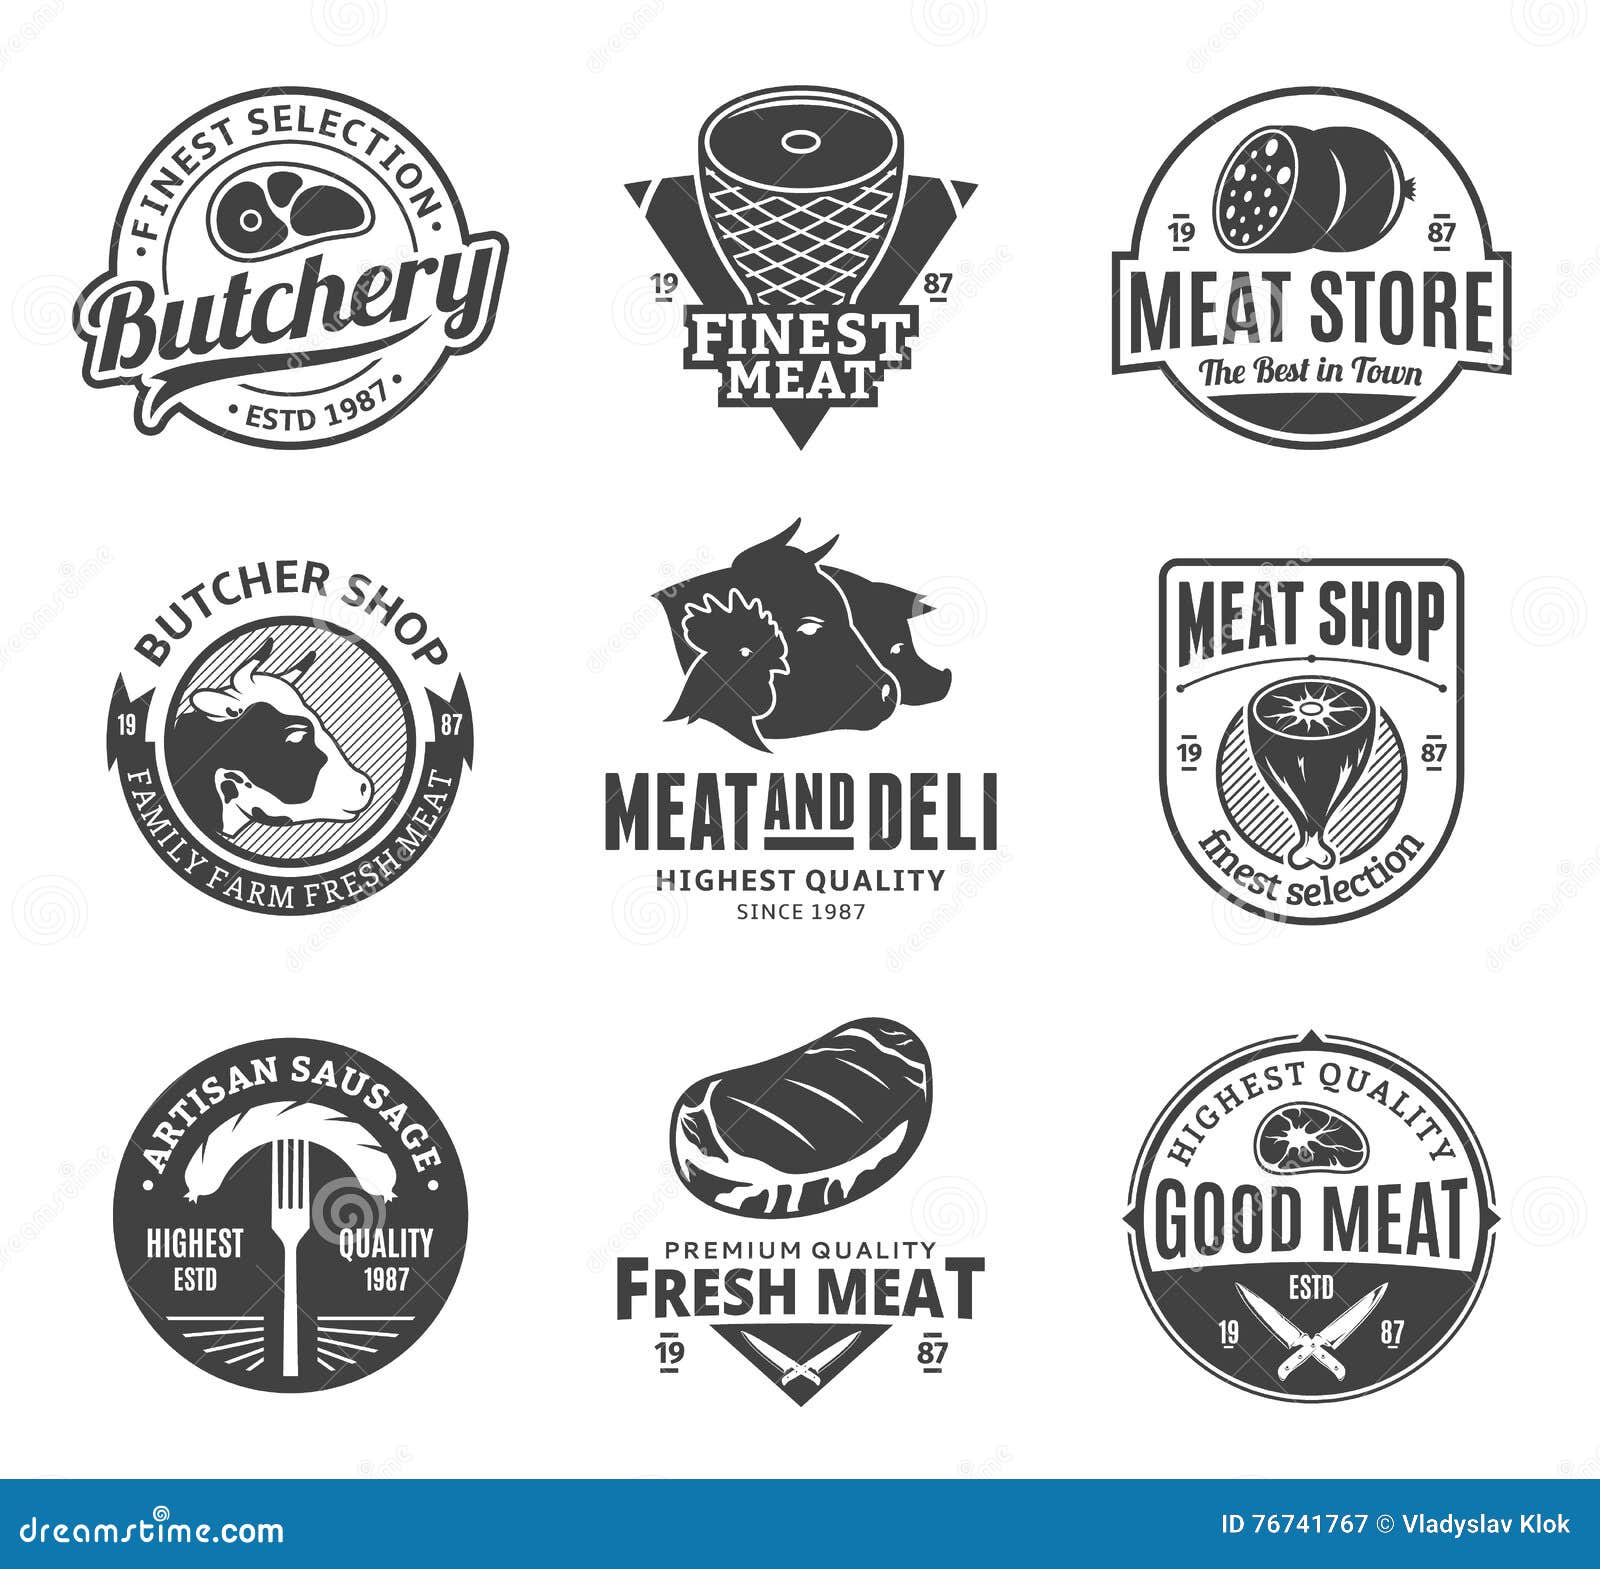  butchery and meat logo, icons and  s